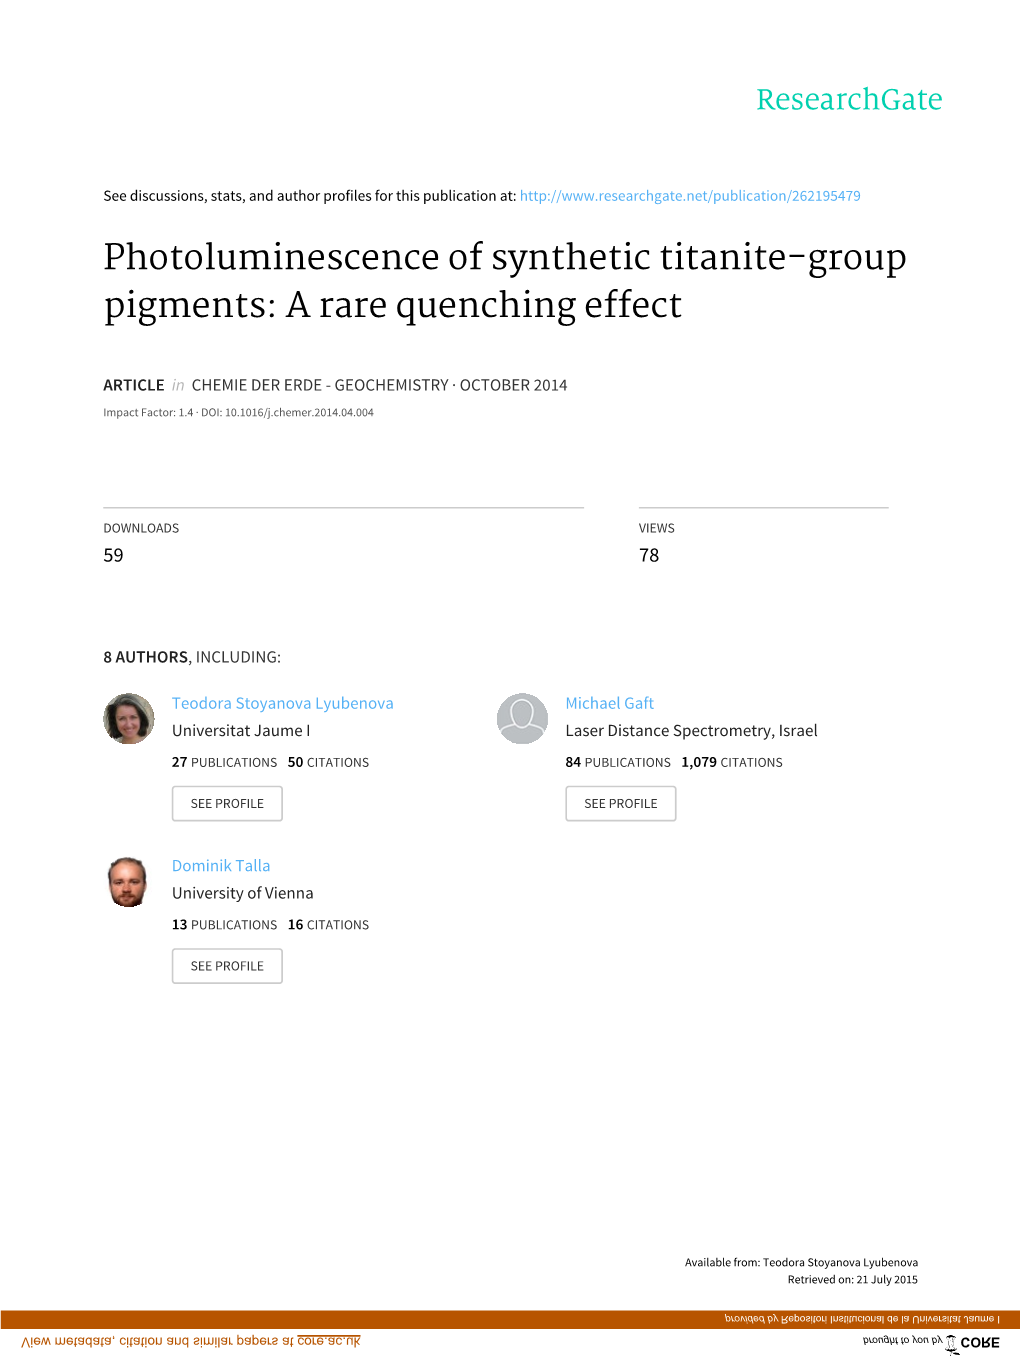 Photoluminescence of Synthetic Titanite-Group Pigments: a Rare Quenching Effect